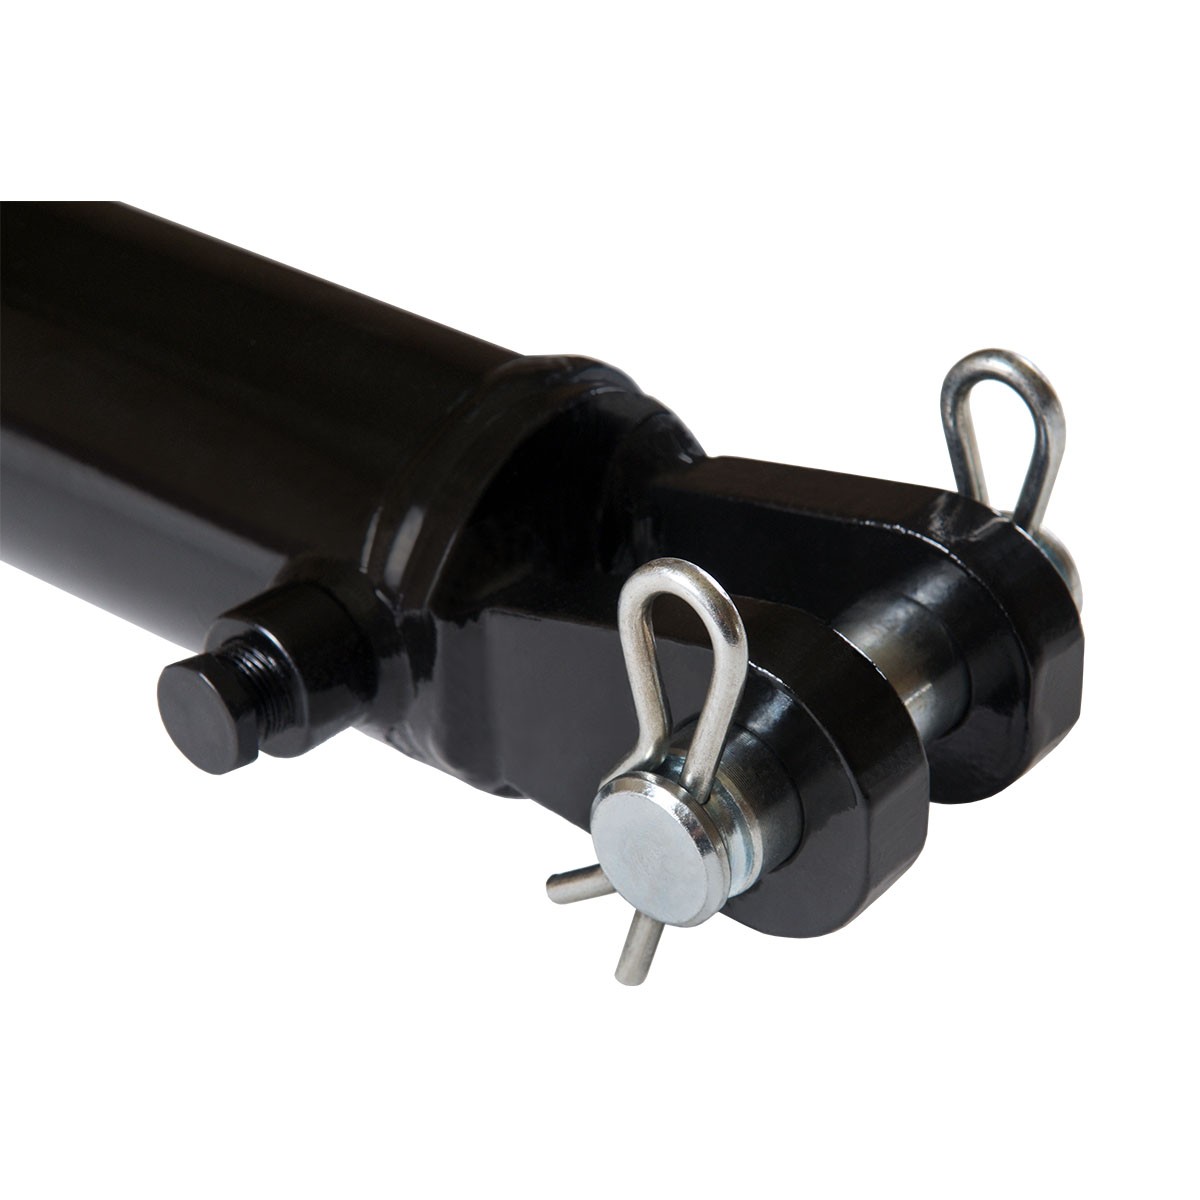 3.5" bore x 8" ASAE stroke ag clevis hydraulic cylinder